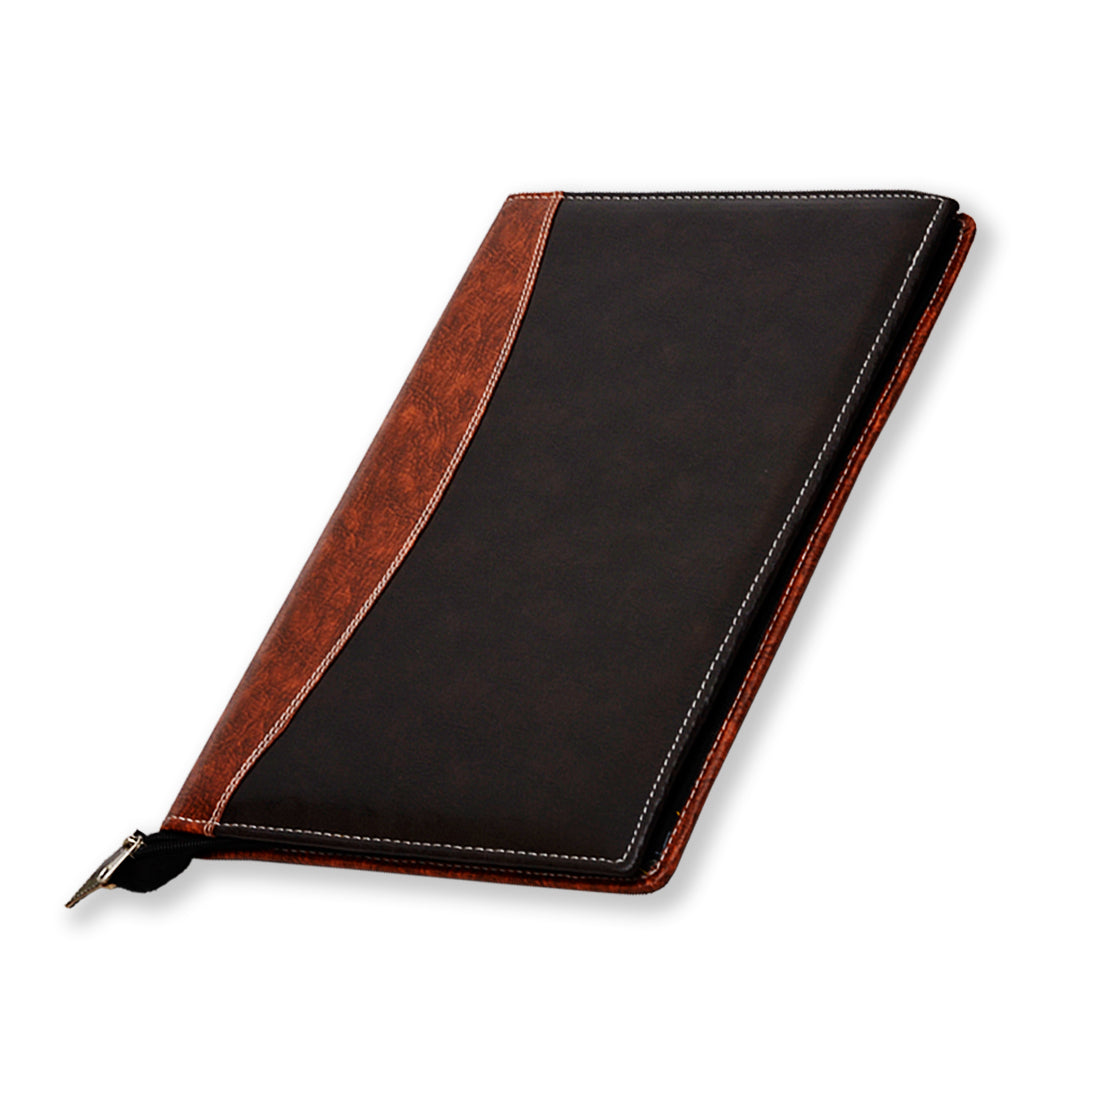 Premium Leatherette Folder with 20 Thick Leafs (Approx.)